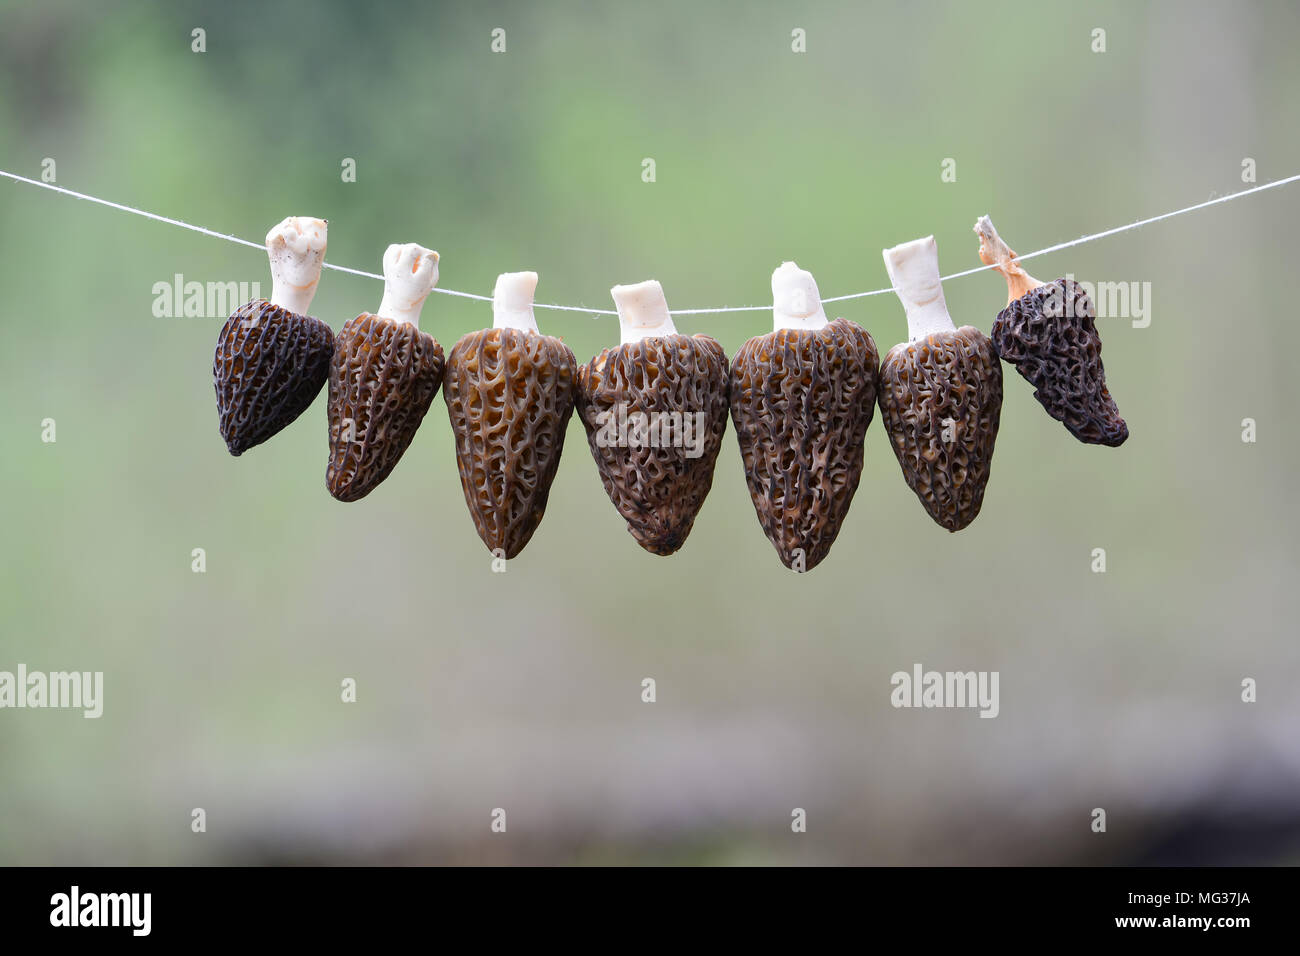 Morels in process of drying on strong, white string against blurred green background with copy space Stock Photo